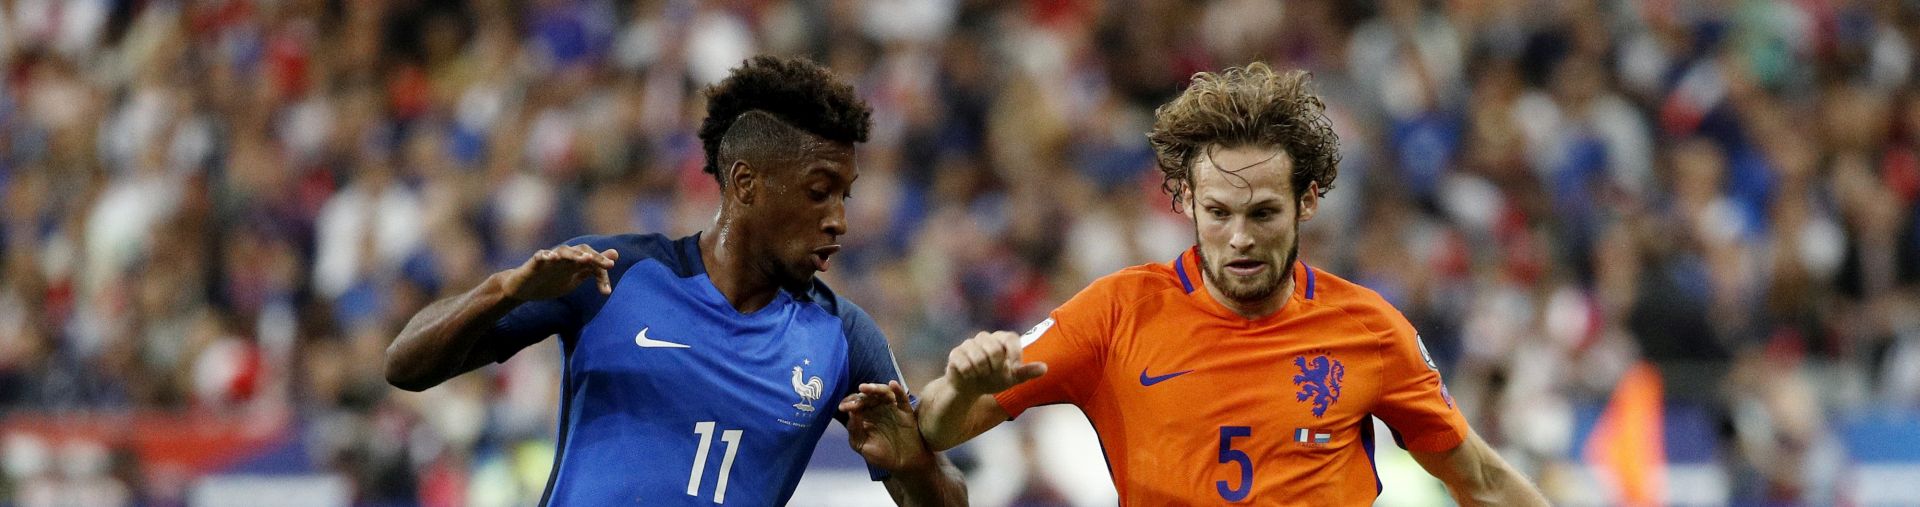 epa06175035 Kingsley Coman (L) of France vies for the ball with Daley Blind (R) of The Netherlands during the FIFA World Cup qualification Round 1 - Group A soccer match between France and The Netherlands at the Stade de France stadium, in Saint-Denis, Paris, France, 31 August 2017.  EPA/YOAN VALAT